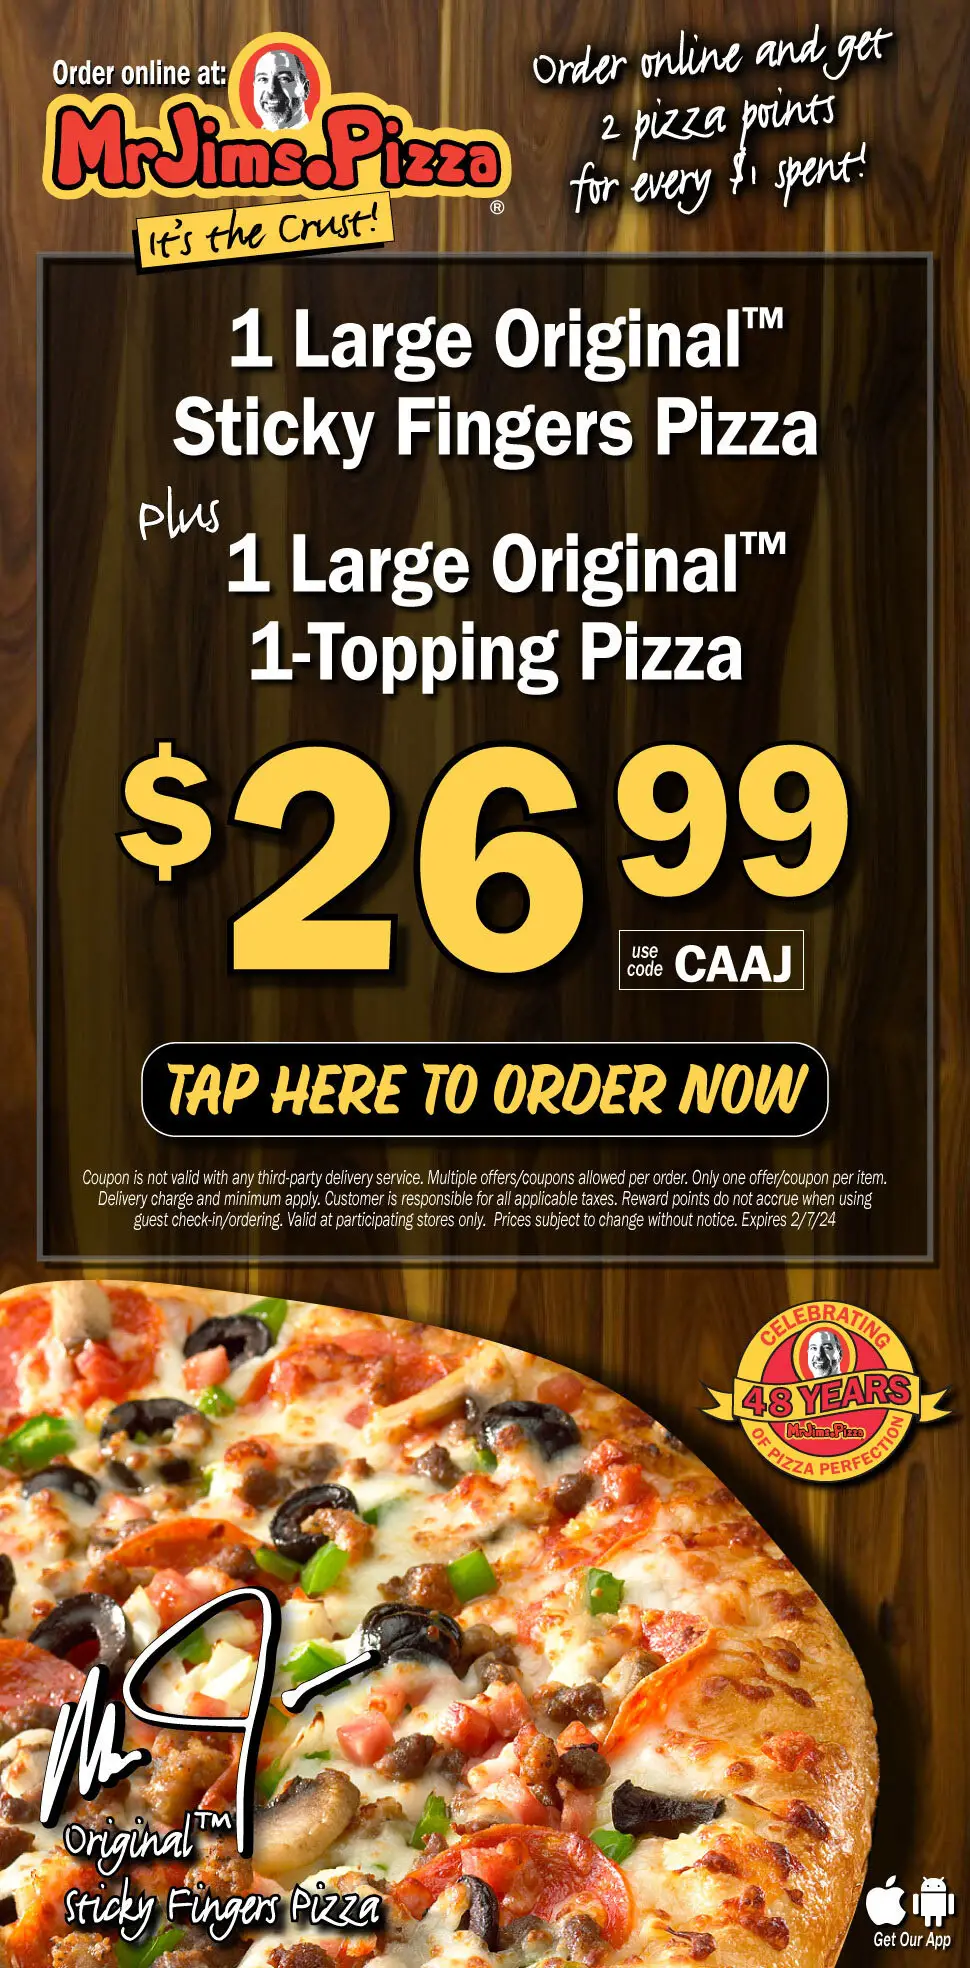 Mr. Jim's Pizza National Pizza Week Get 1 Large Original Sticky Fingers Pizza PLUS 1 Large Original 1-Topping Pizza for Only $26.99